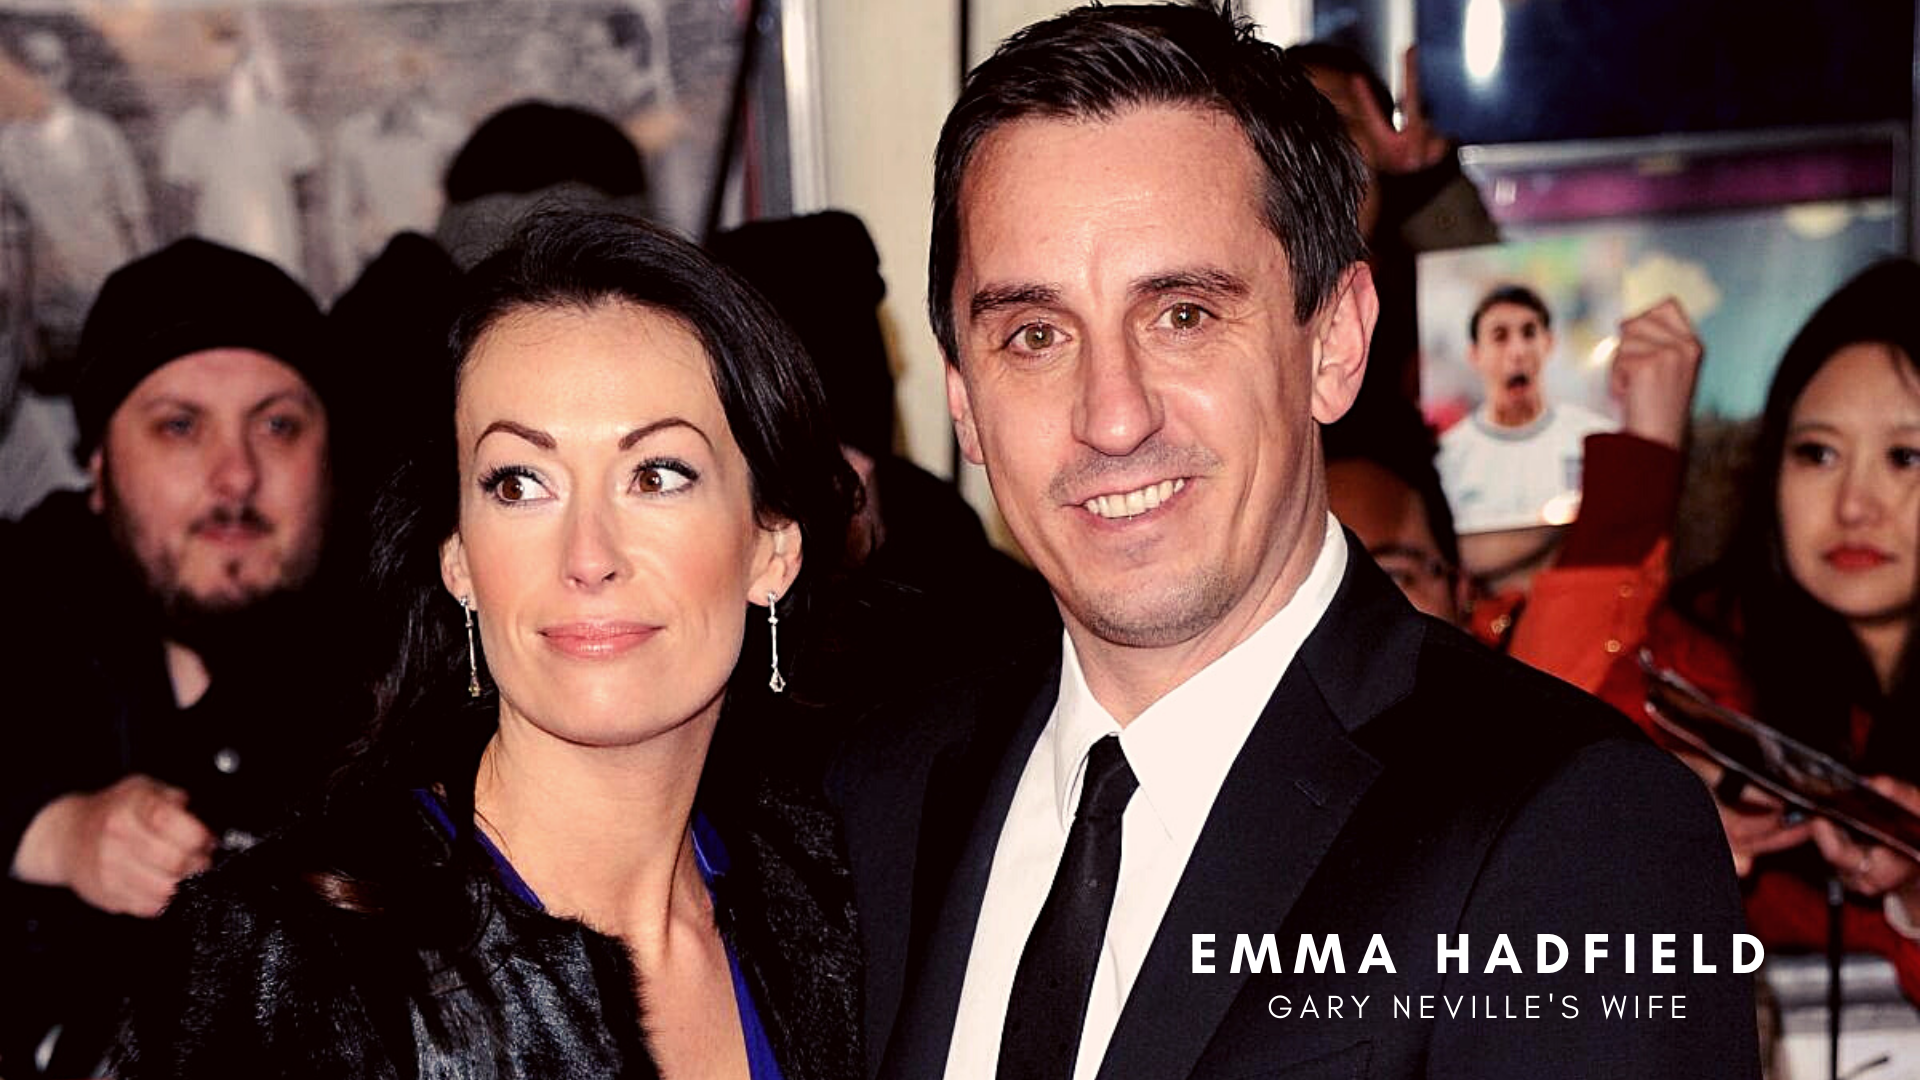 Gary Neville with his wife Emma Hadfield. (Credit: Getty)